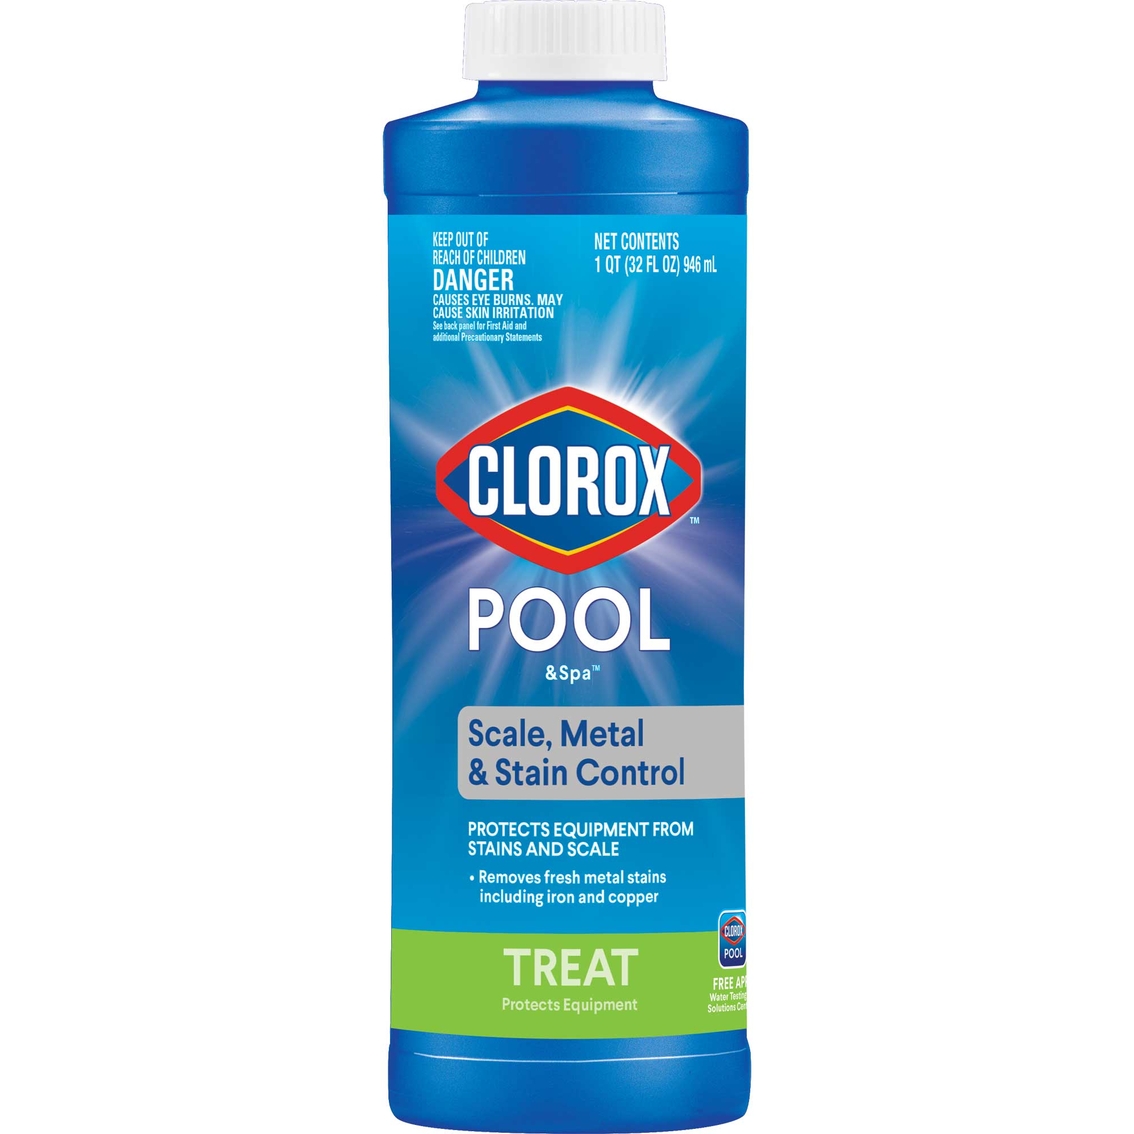 Clorox Pool and Spa Scale Metal and Stain Control